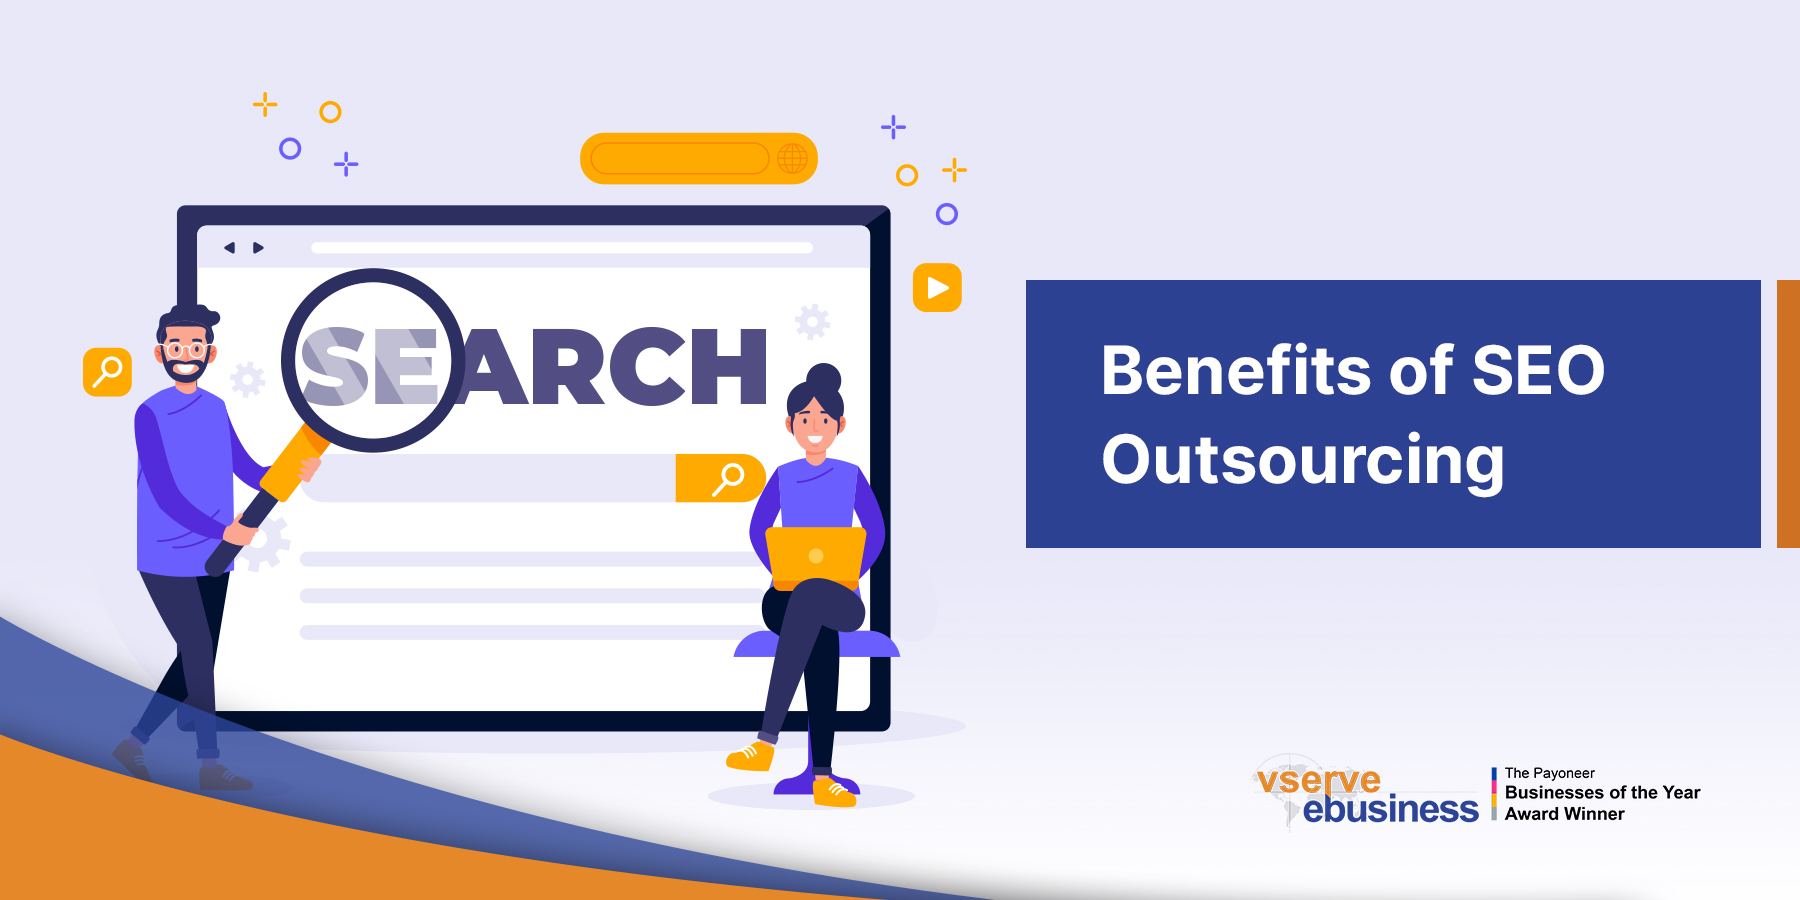 What Are the Benefits of SEO Outsourcing